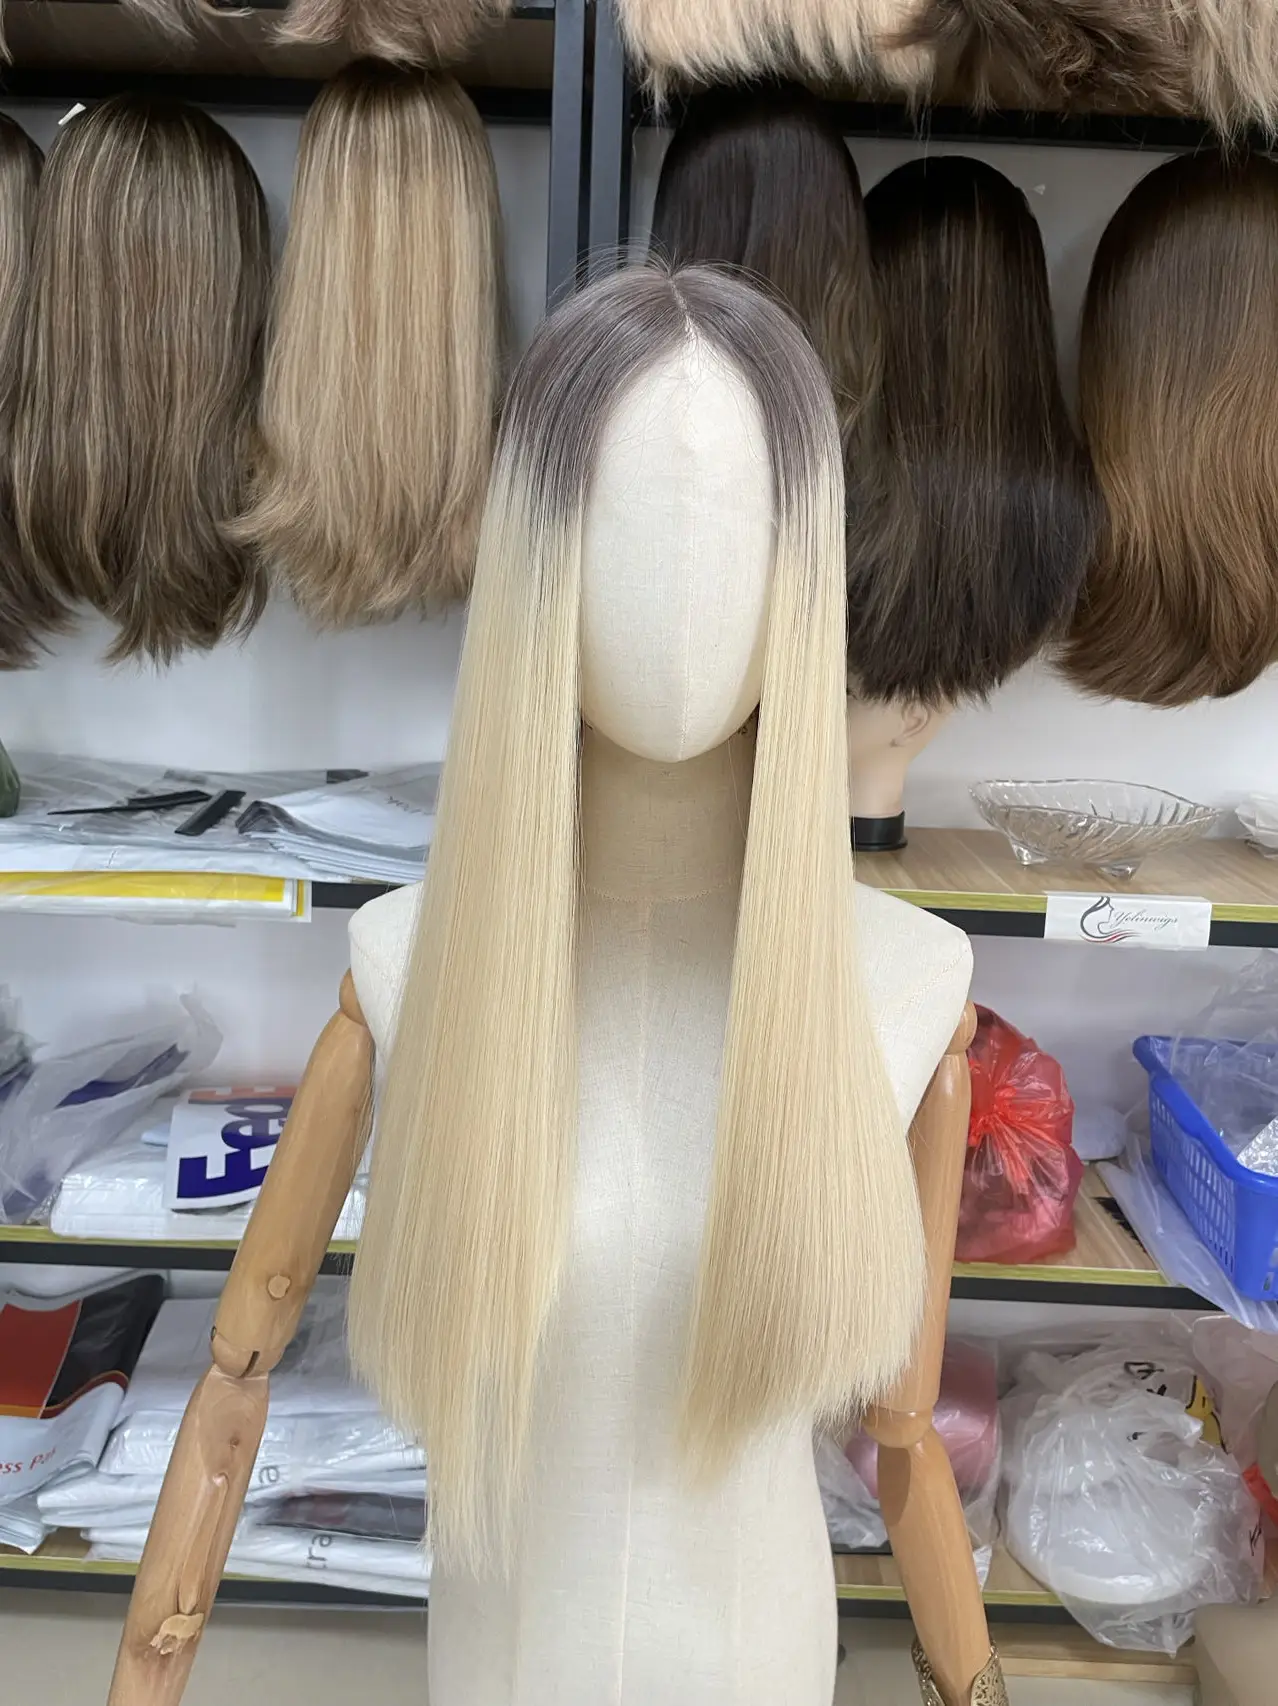 

Yelin #NMC Blonde Wig with Ashy Roots Jewish Lace Top Wigs European 100% Human Hair Natural Slik and Soft Kosher Fashion Wigs